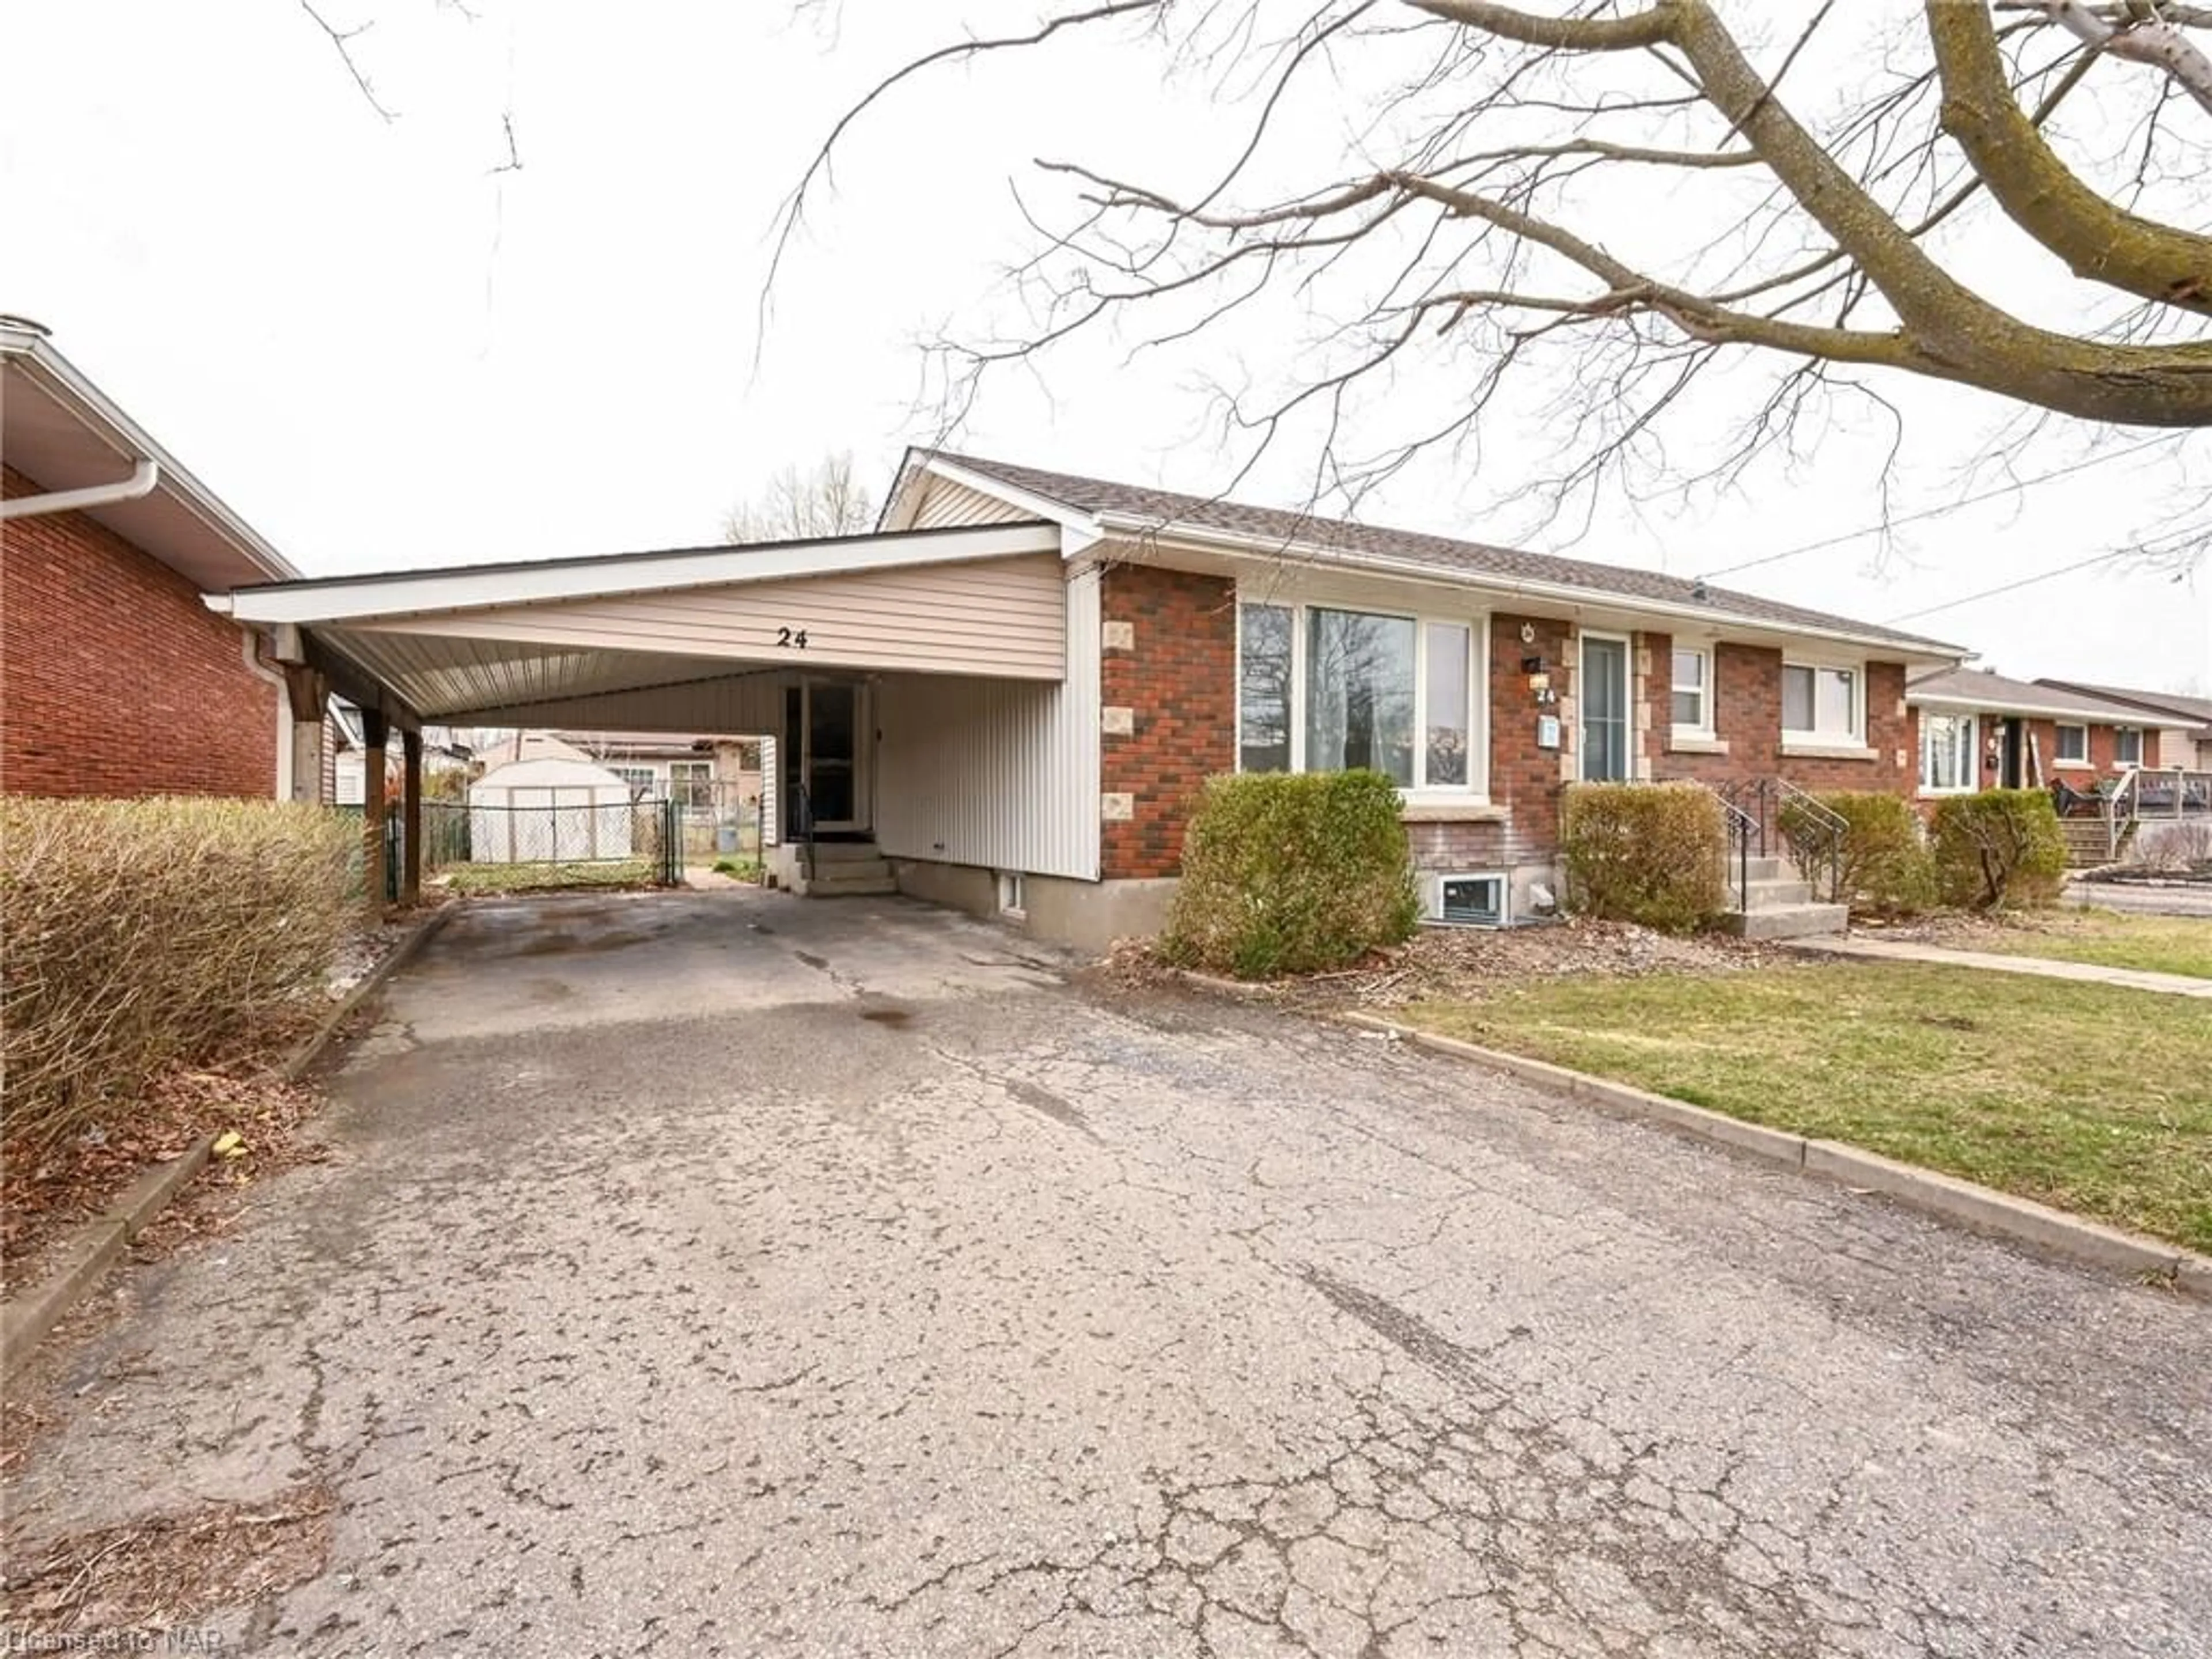 Home with brick exterior material for 24 Ridgeview Ave, St. Catharines Ontario L2M 6B3